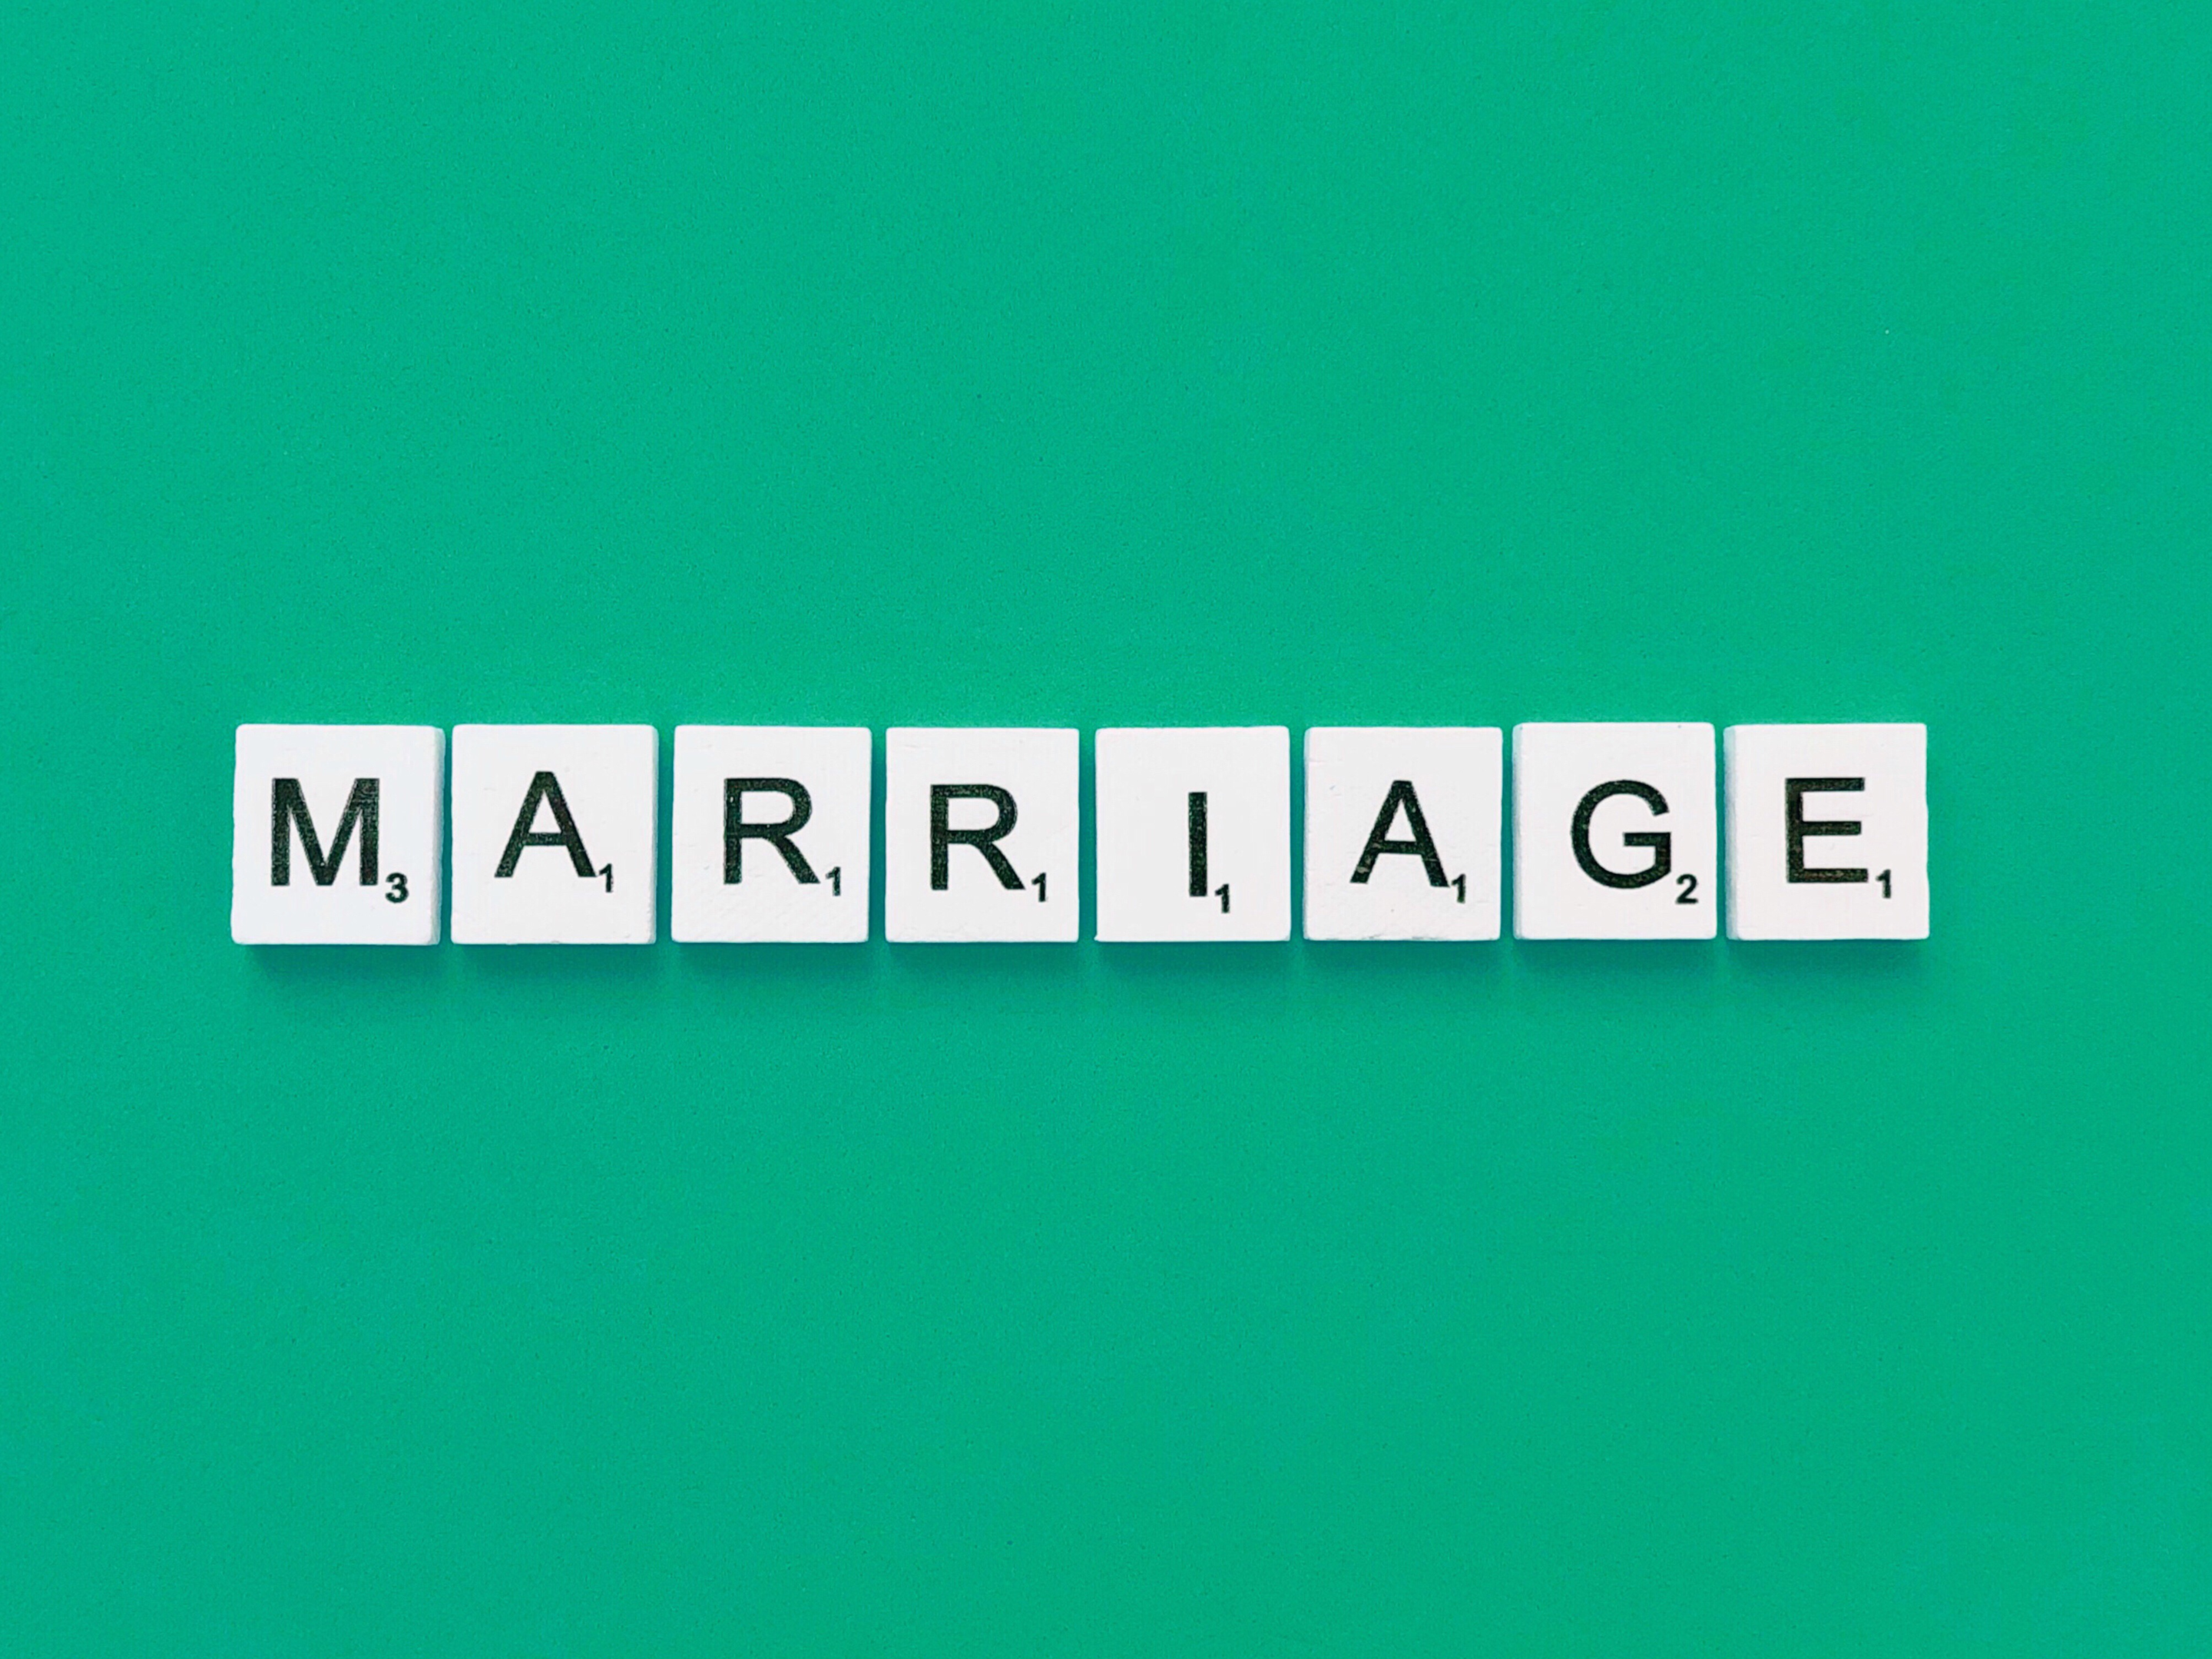  "Block letters spelling 'Marriage', symbolizing a significant life change."